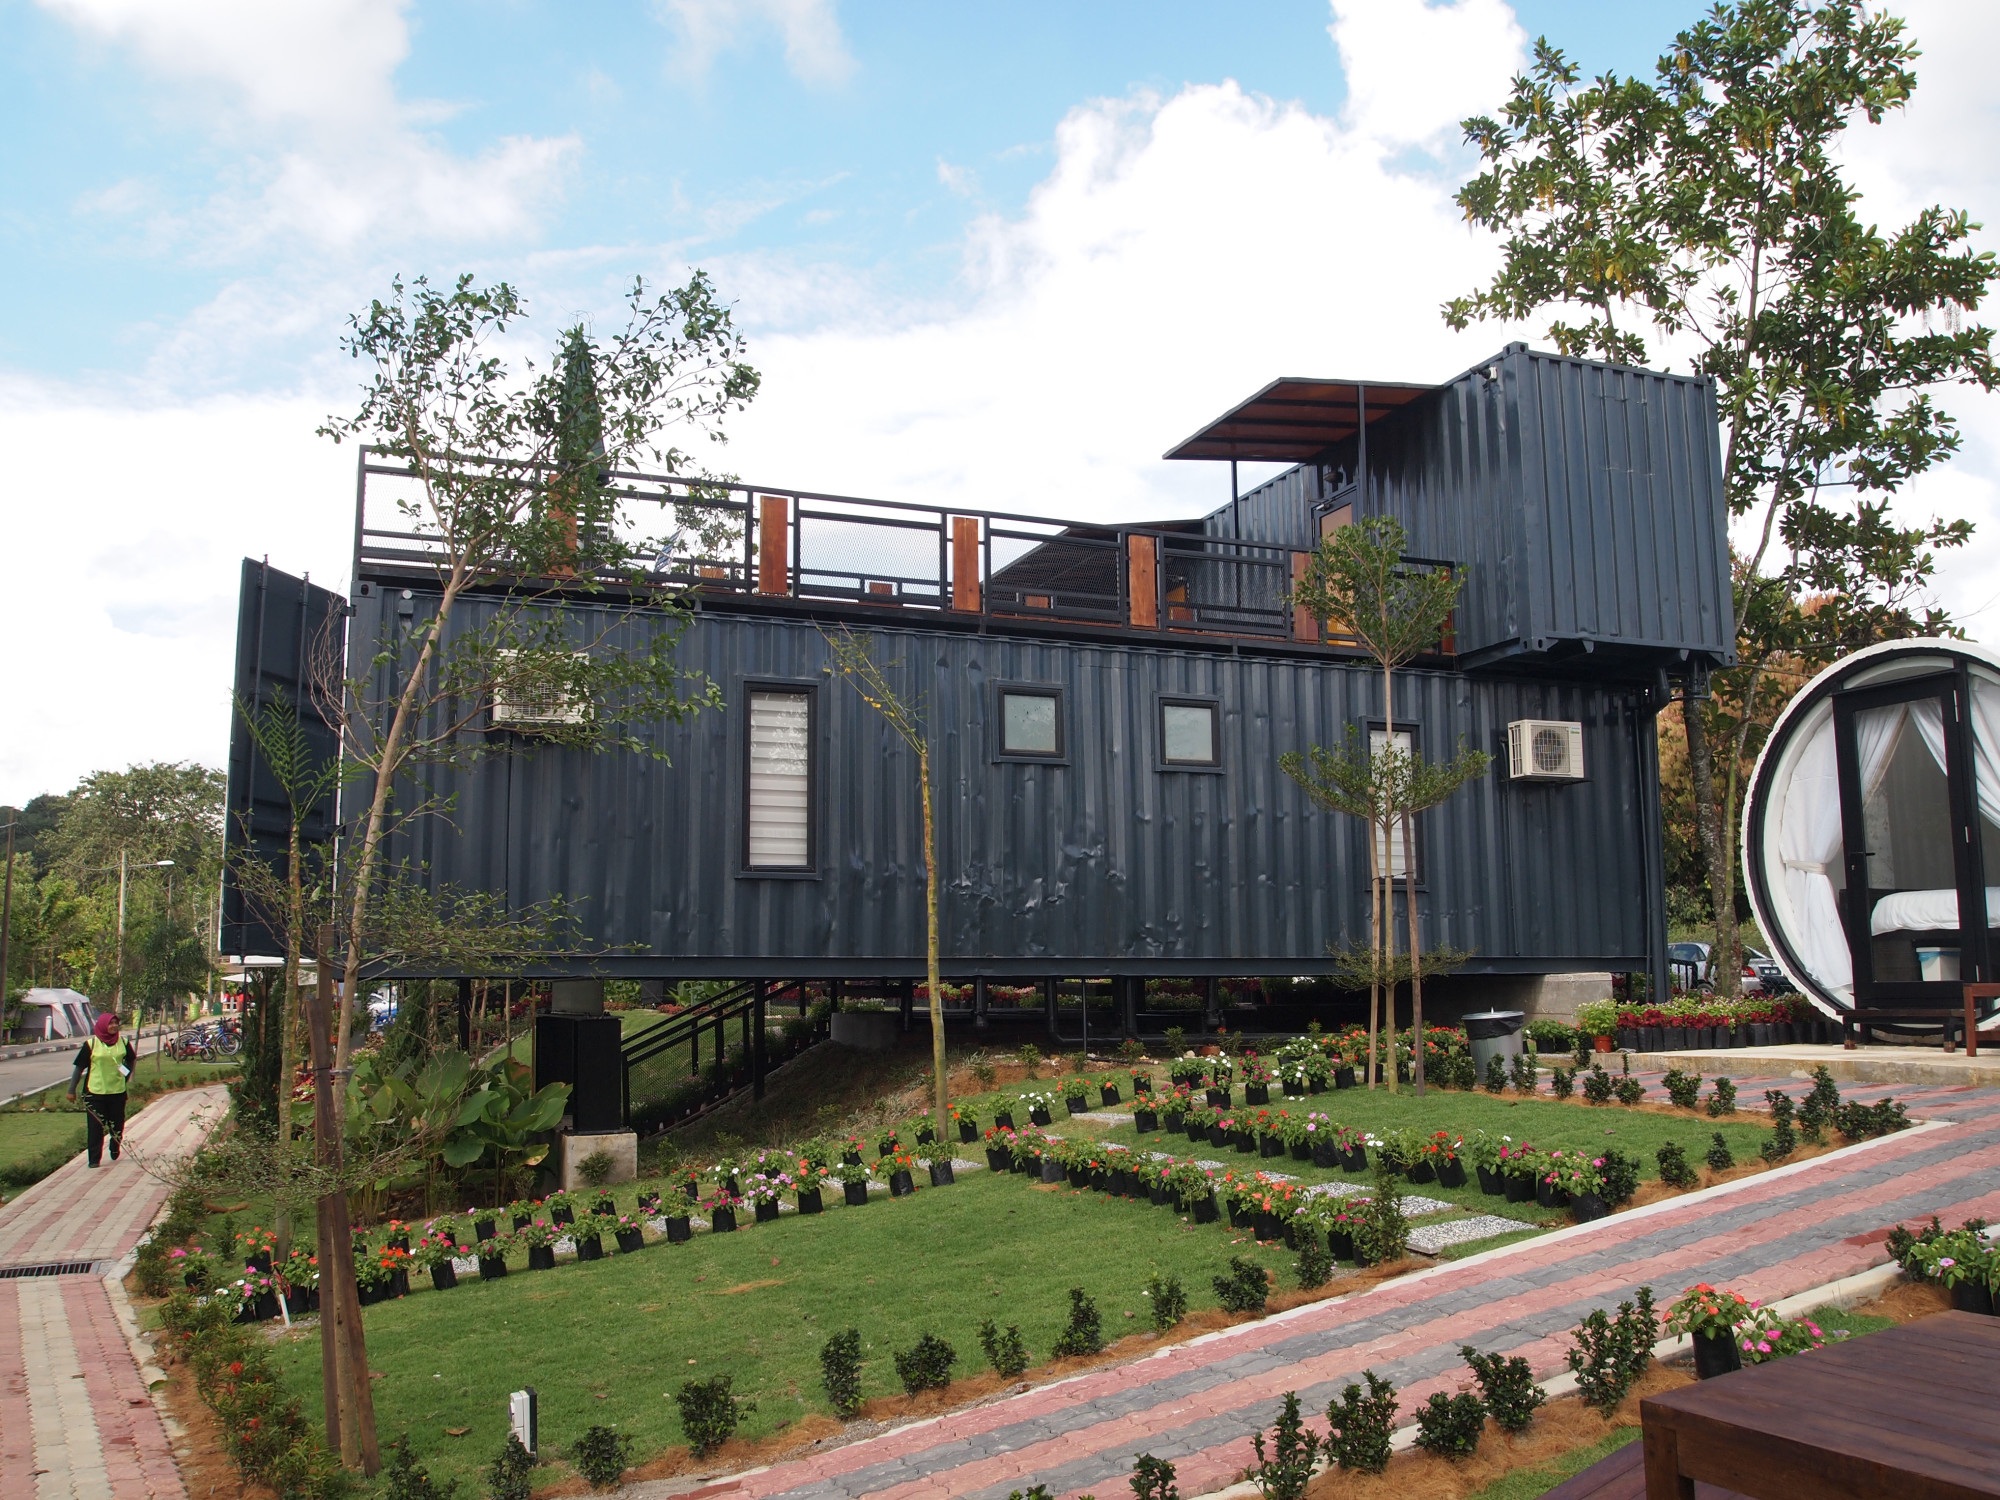 Shipping Container Homes: Types, Cost, Pros and Cons image